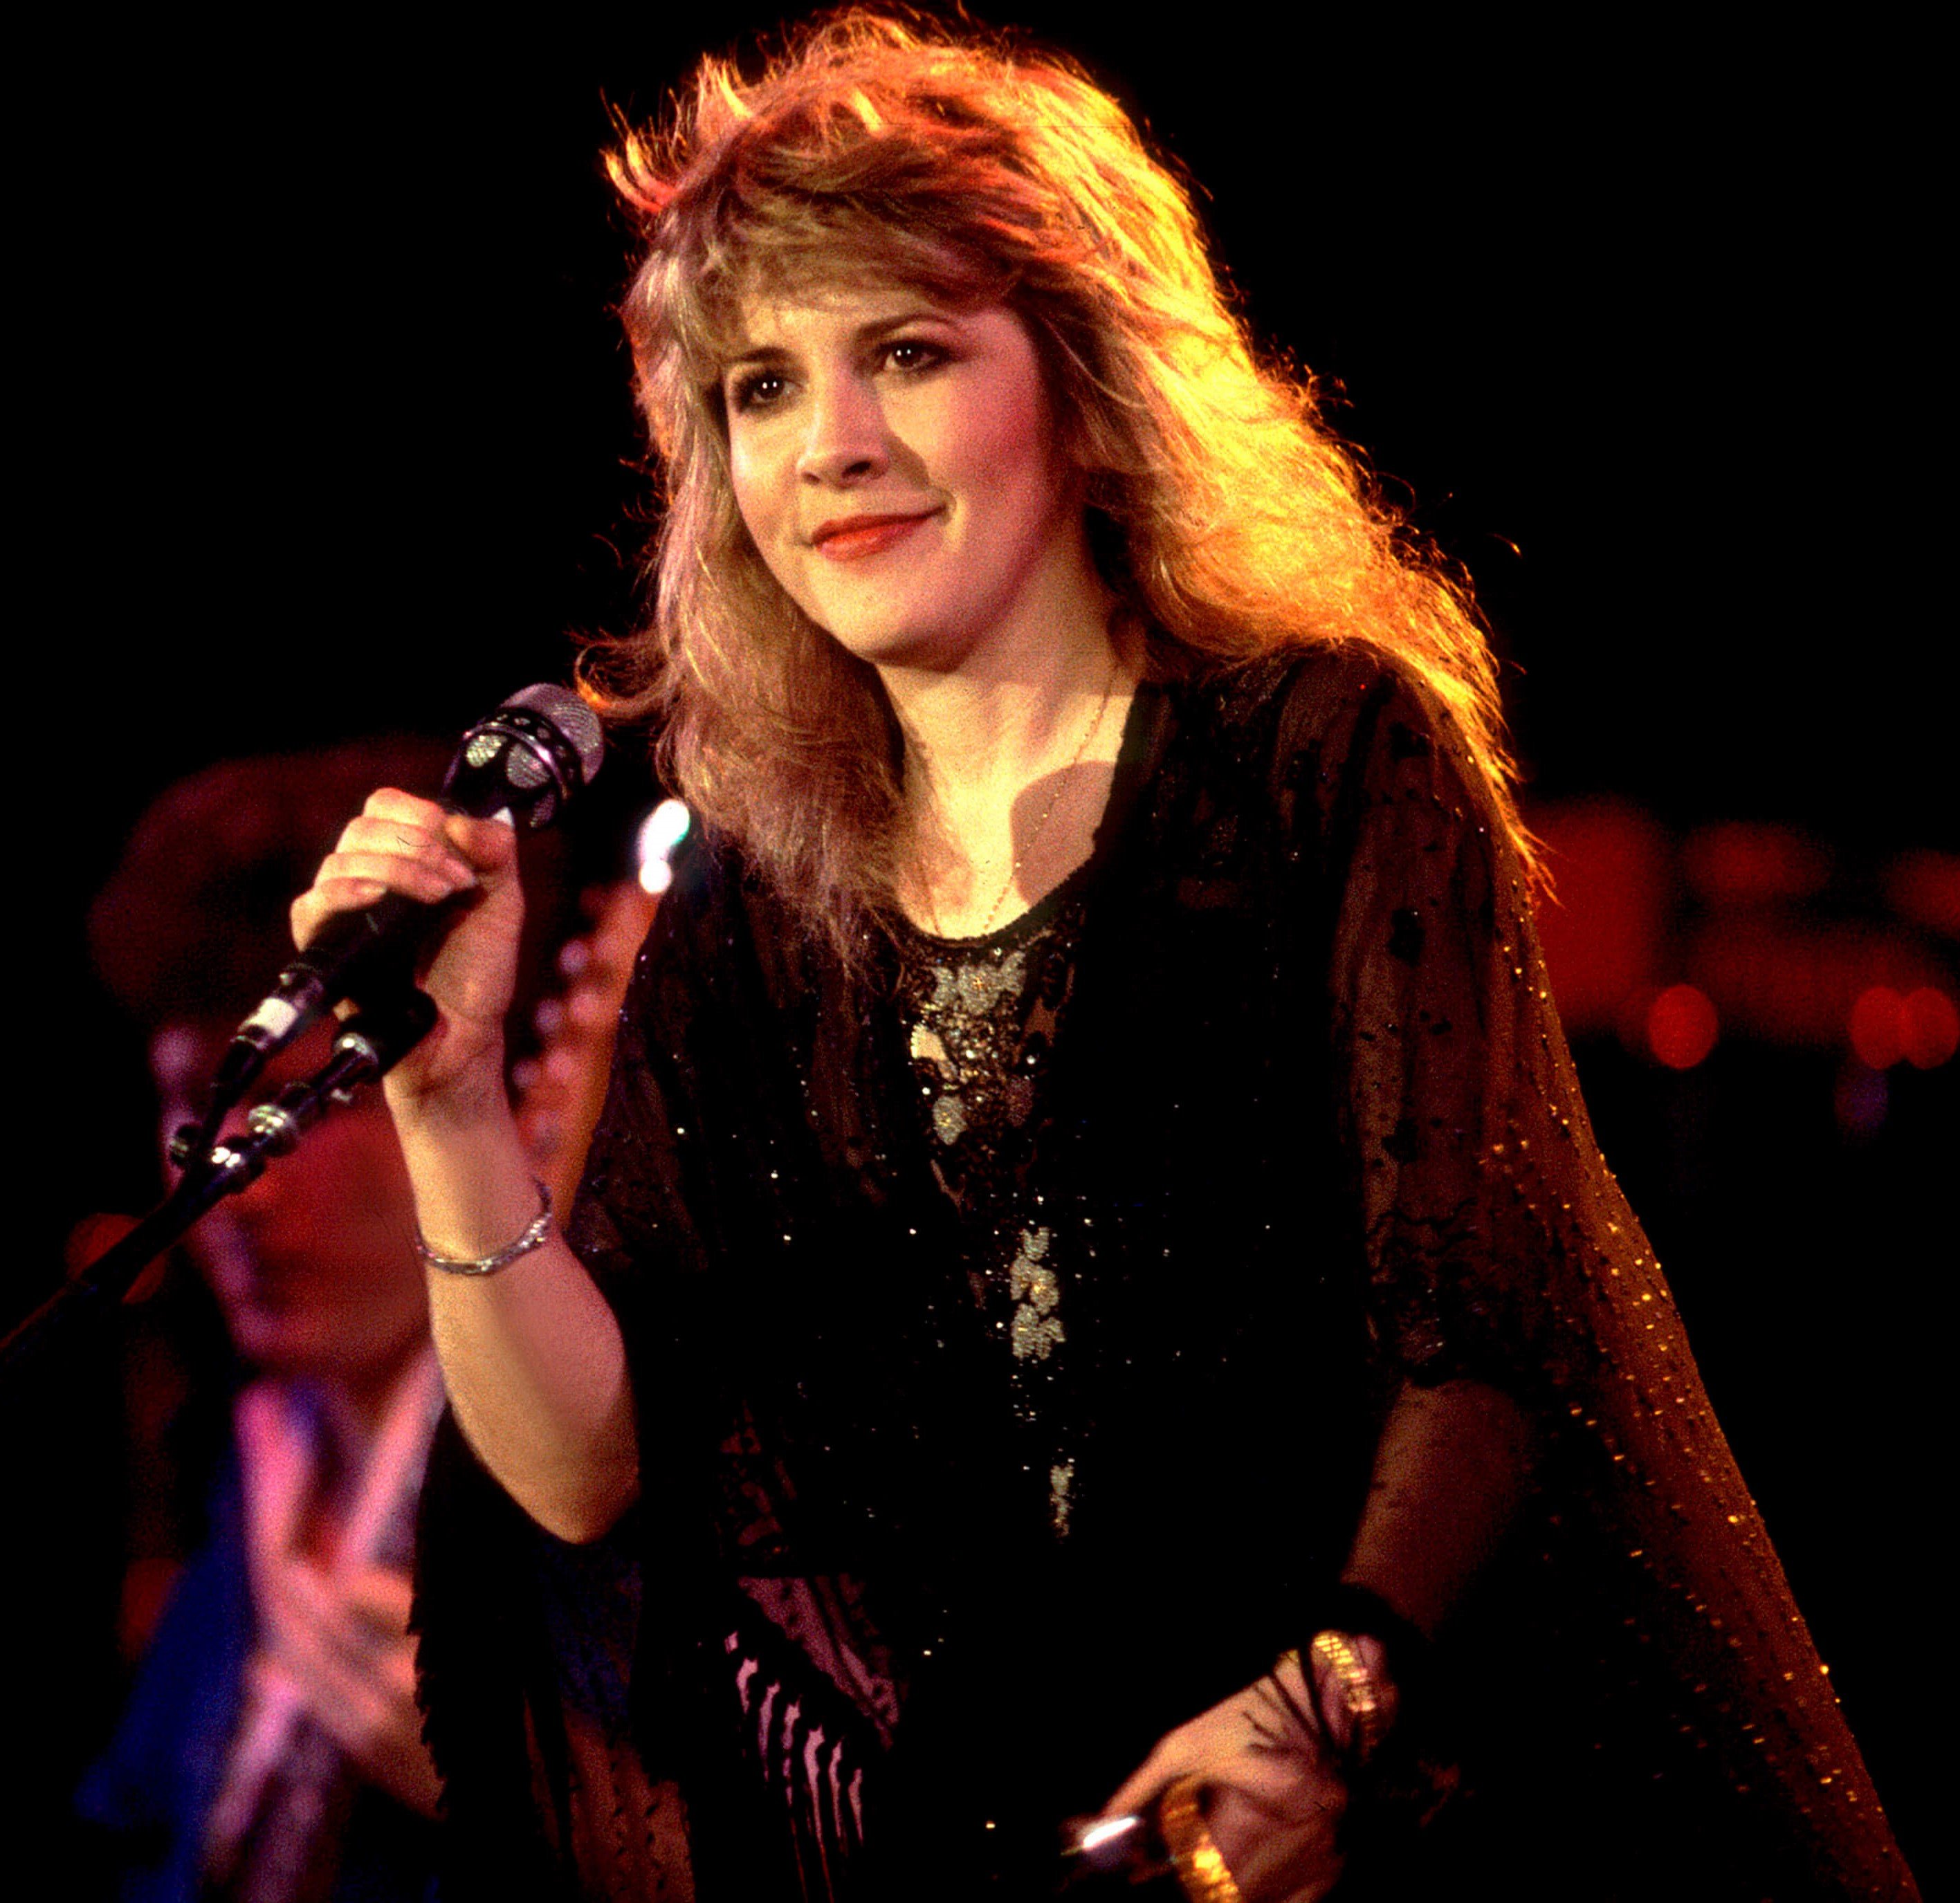 Classic rock star Stevie Nicks with a microphone